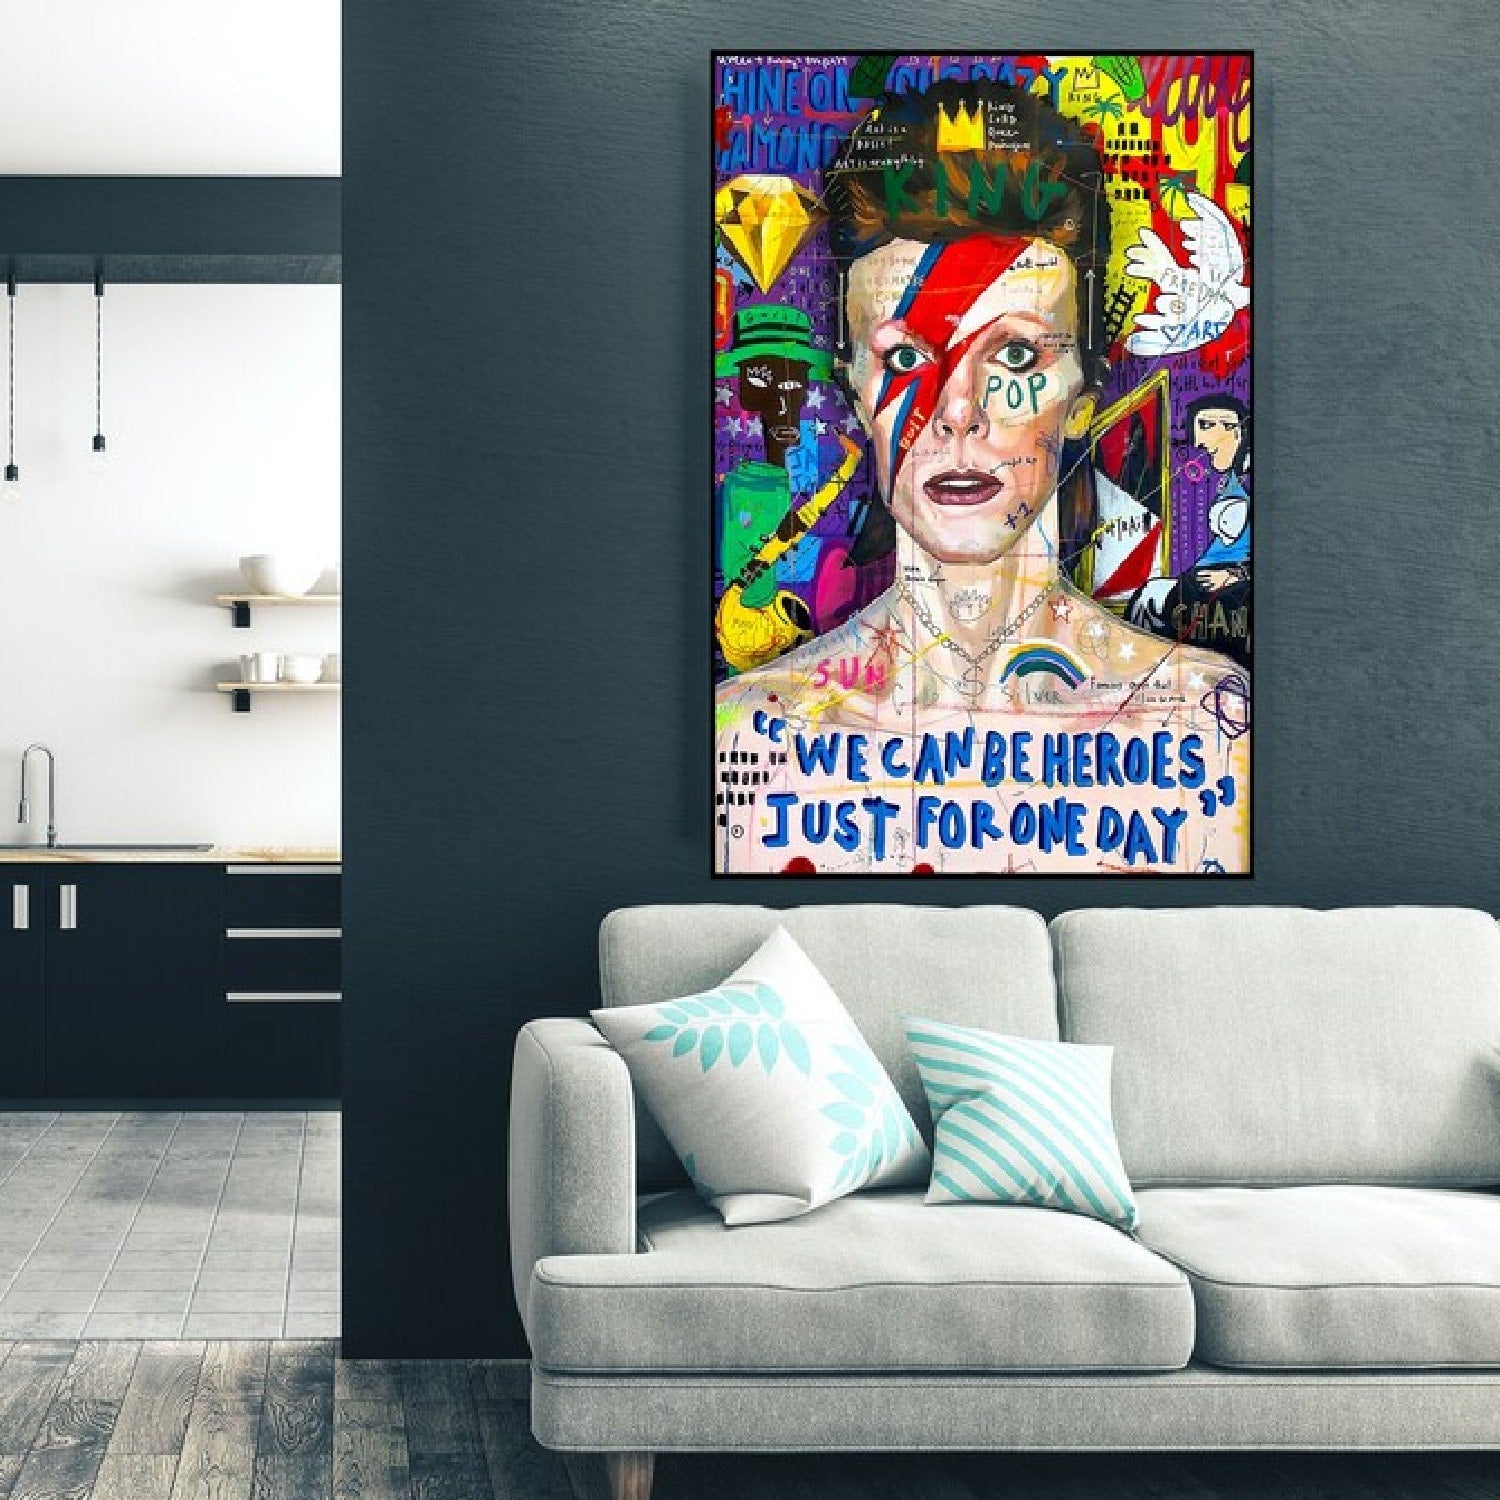 Acrylic King We Can Be Heroes Pop Art Oil Painting